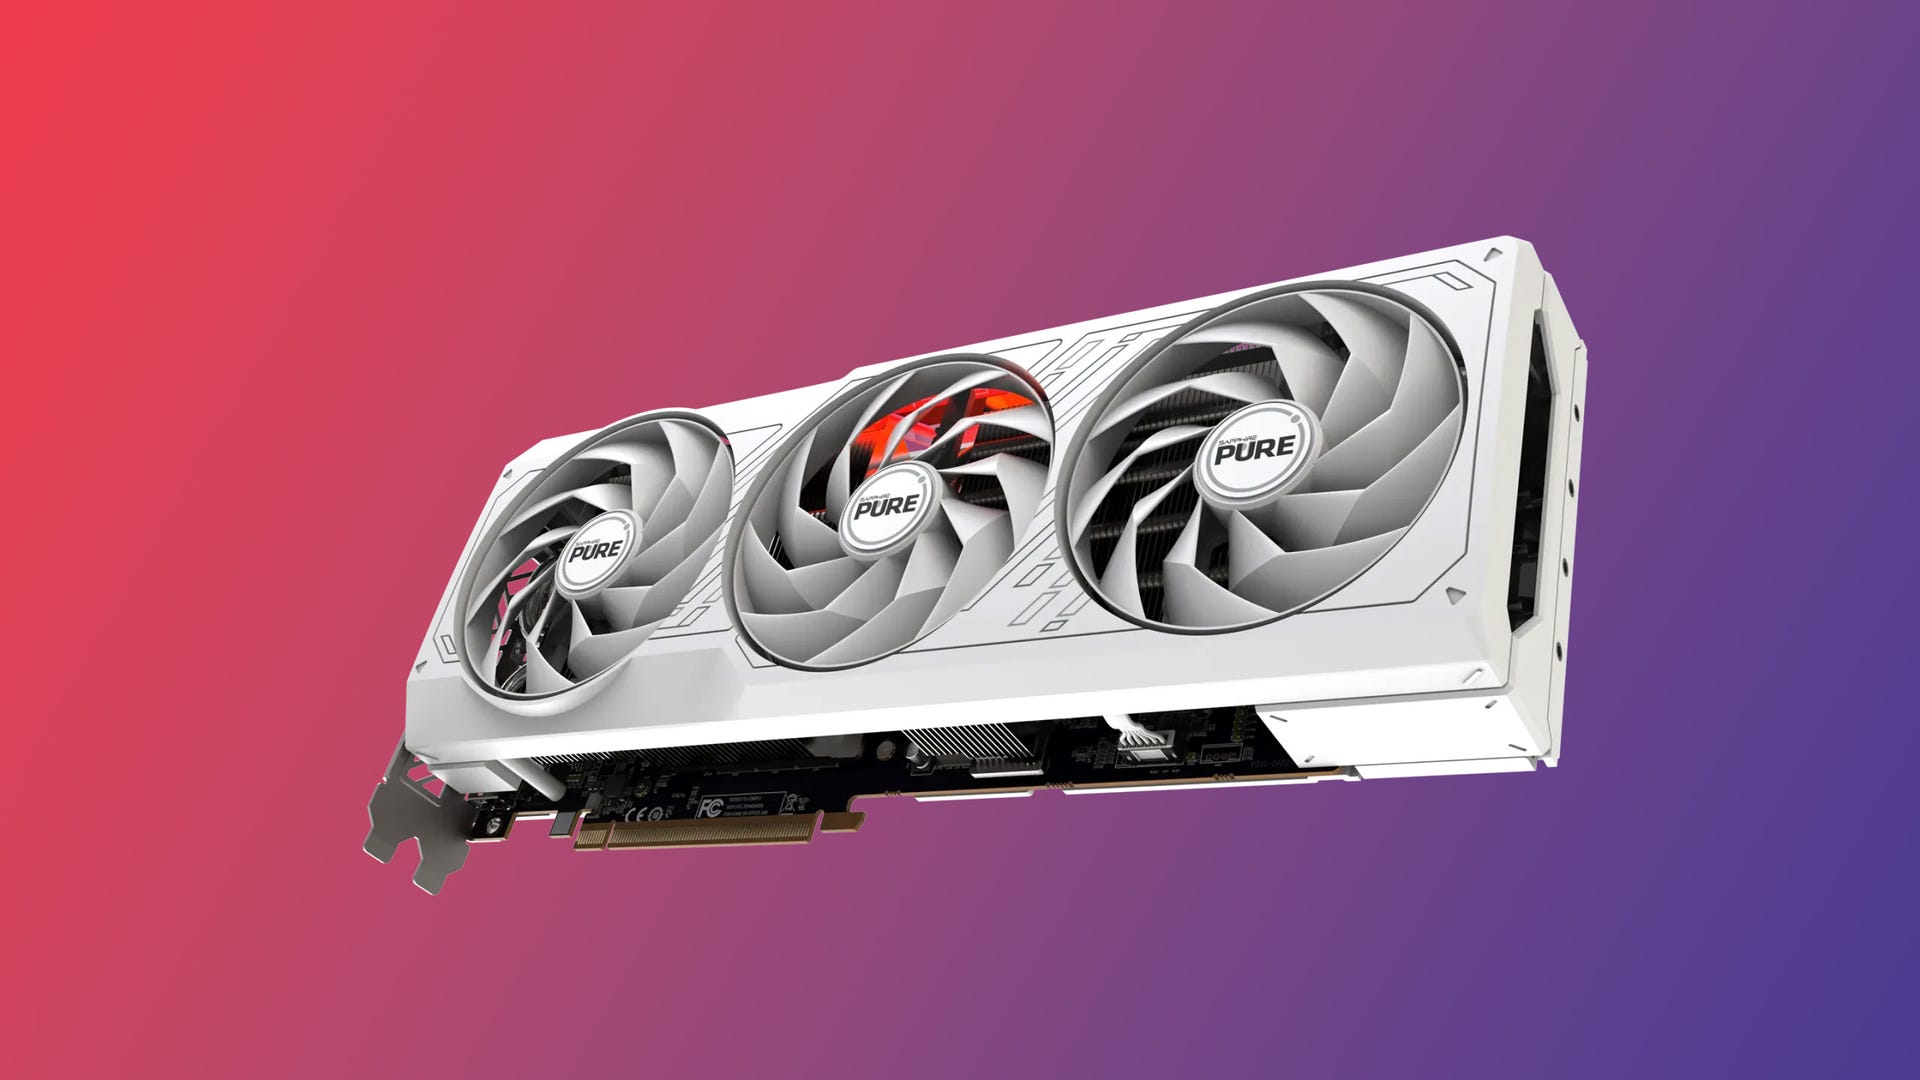 This Sapphire RX 7800 XT in white is down to £499 with an Ebay code